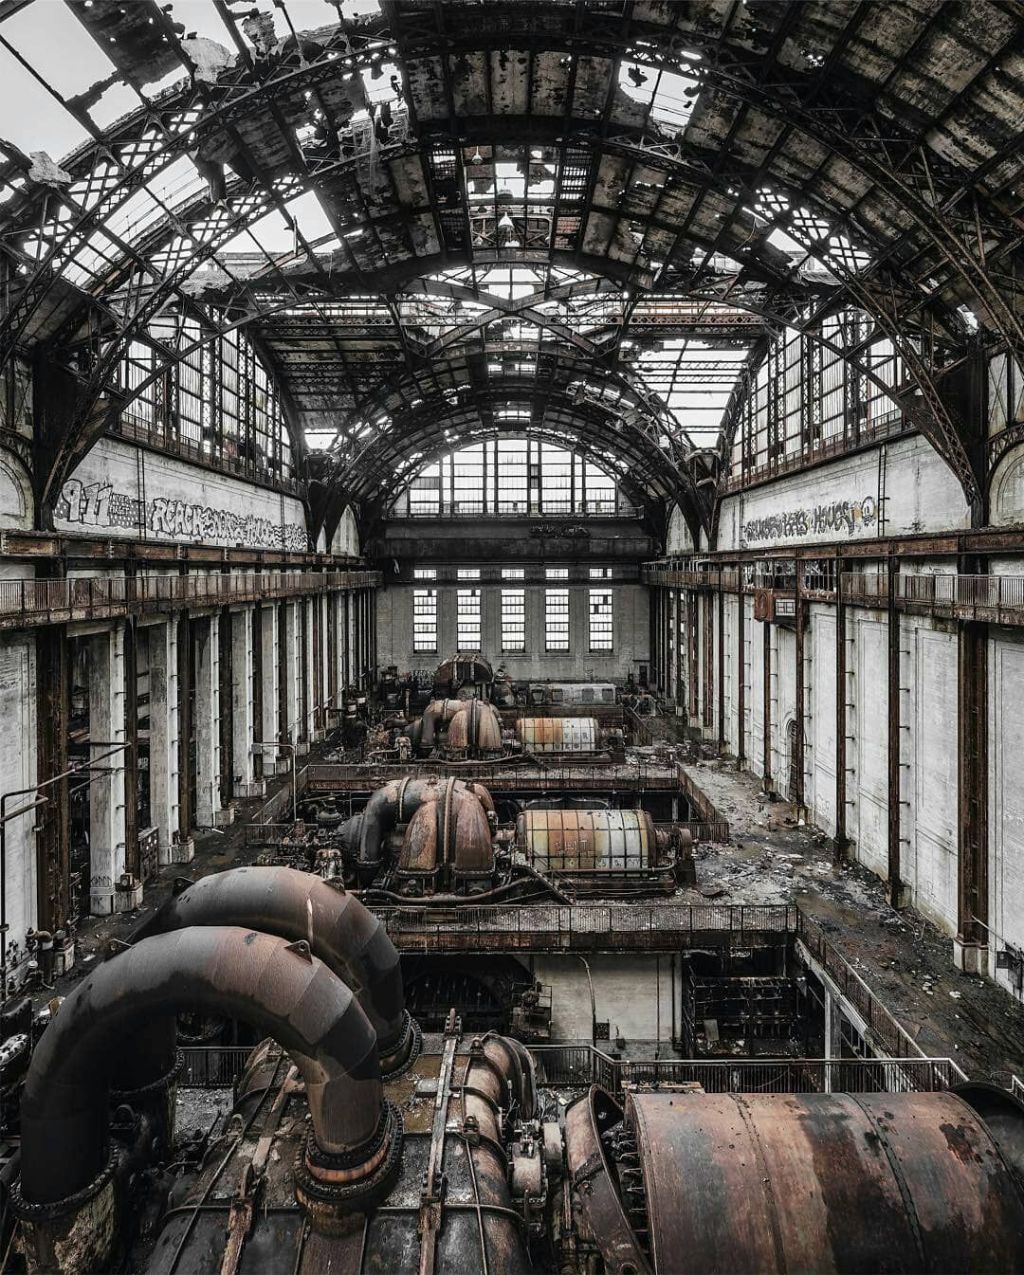 "From Motor City to Chernobyl: Exploring the Haunting Beauty of Abandoned Industrial Sites"